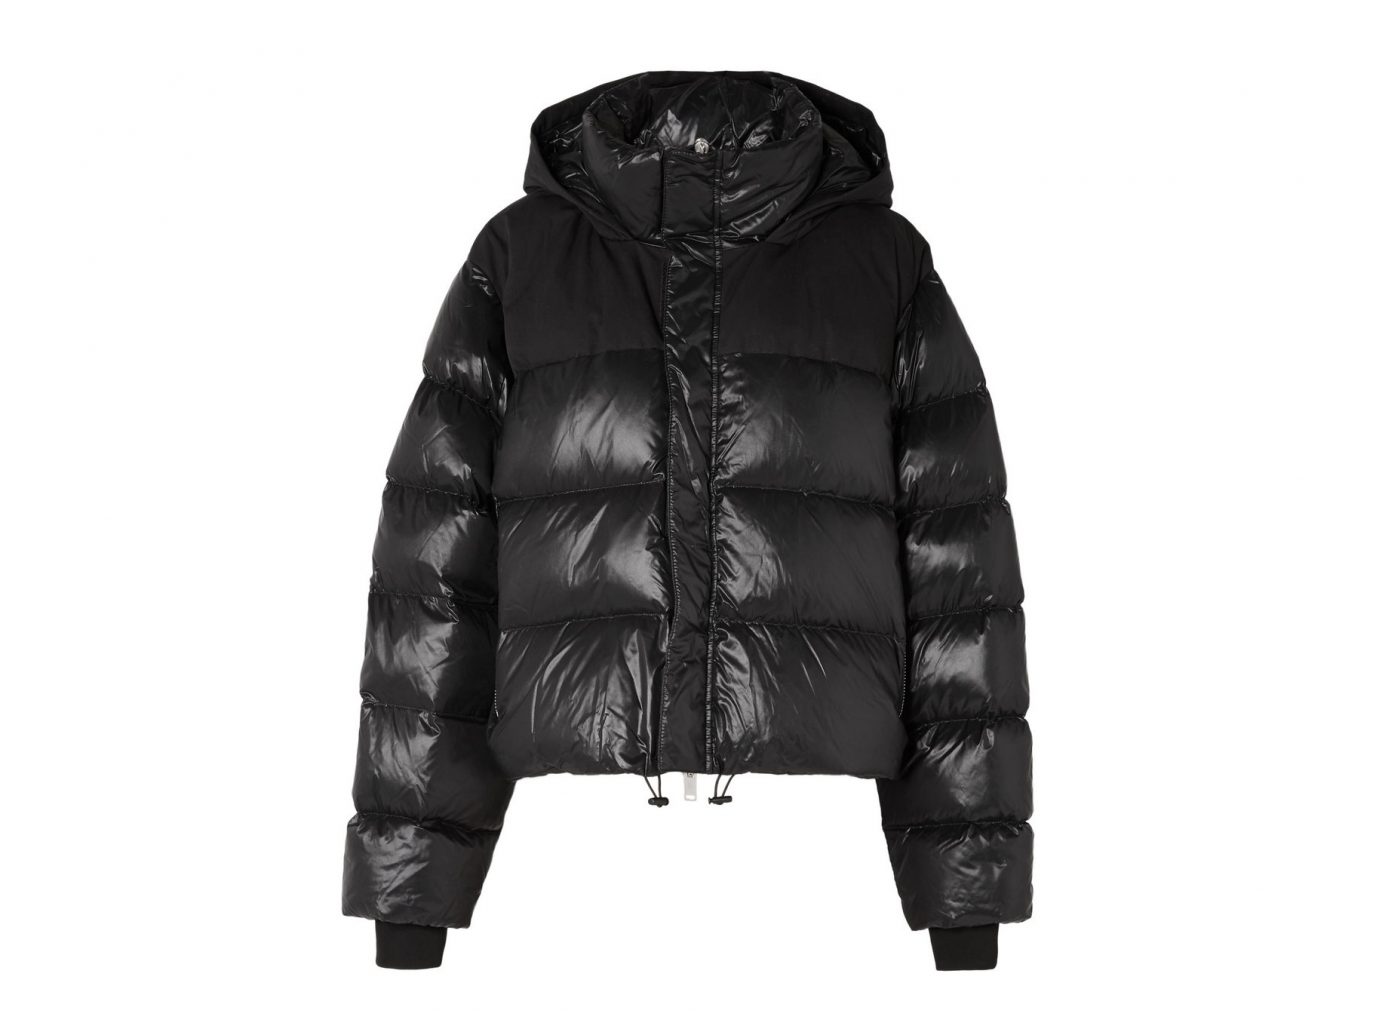 Shop Women's Puffer Jackets On Sale Up to 75% Off - Jetsetter